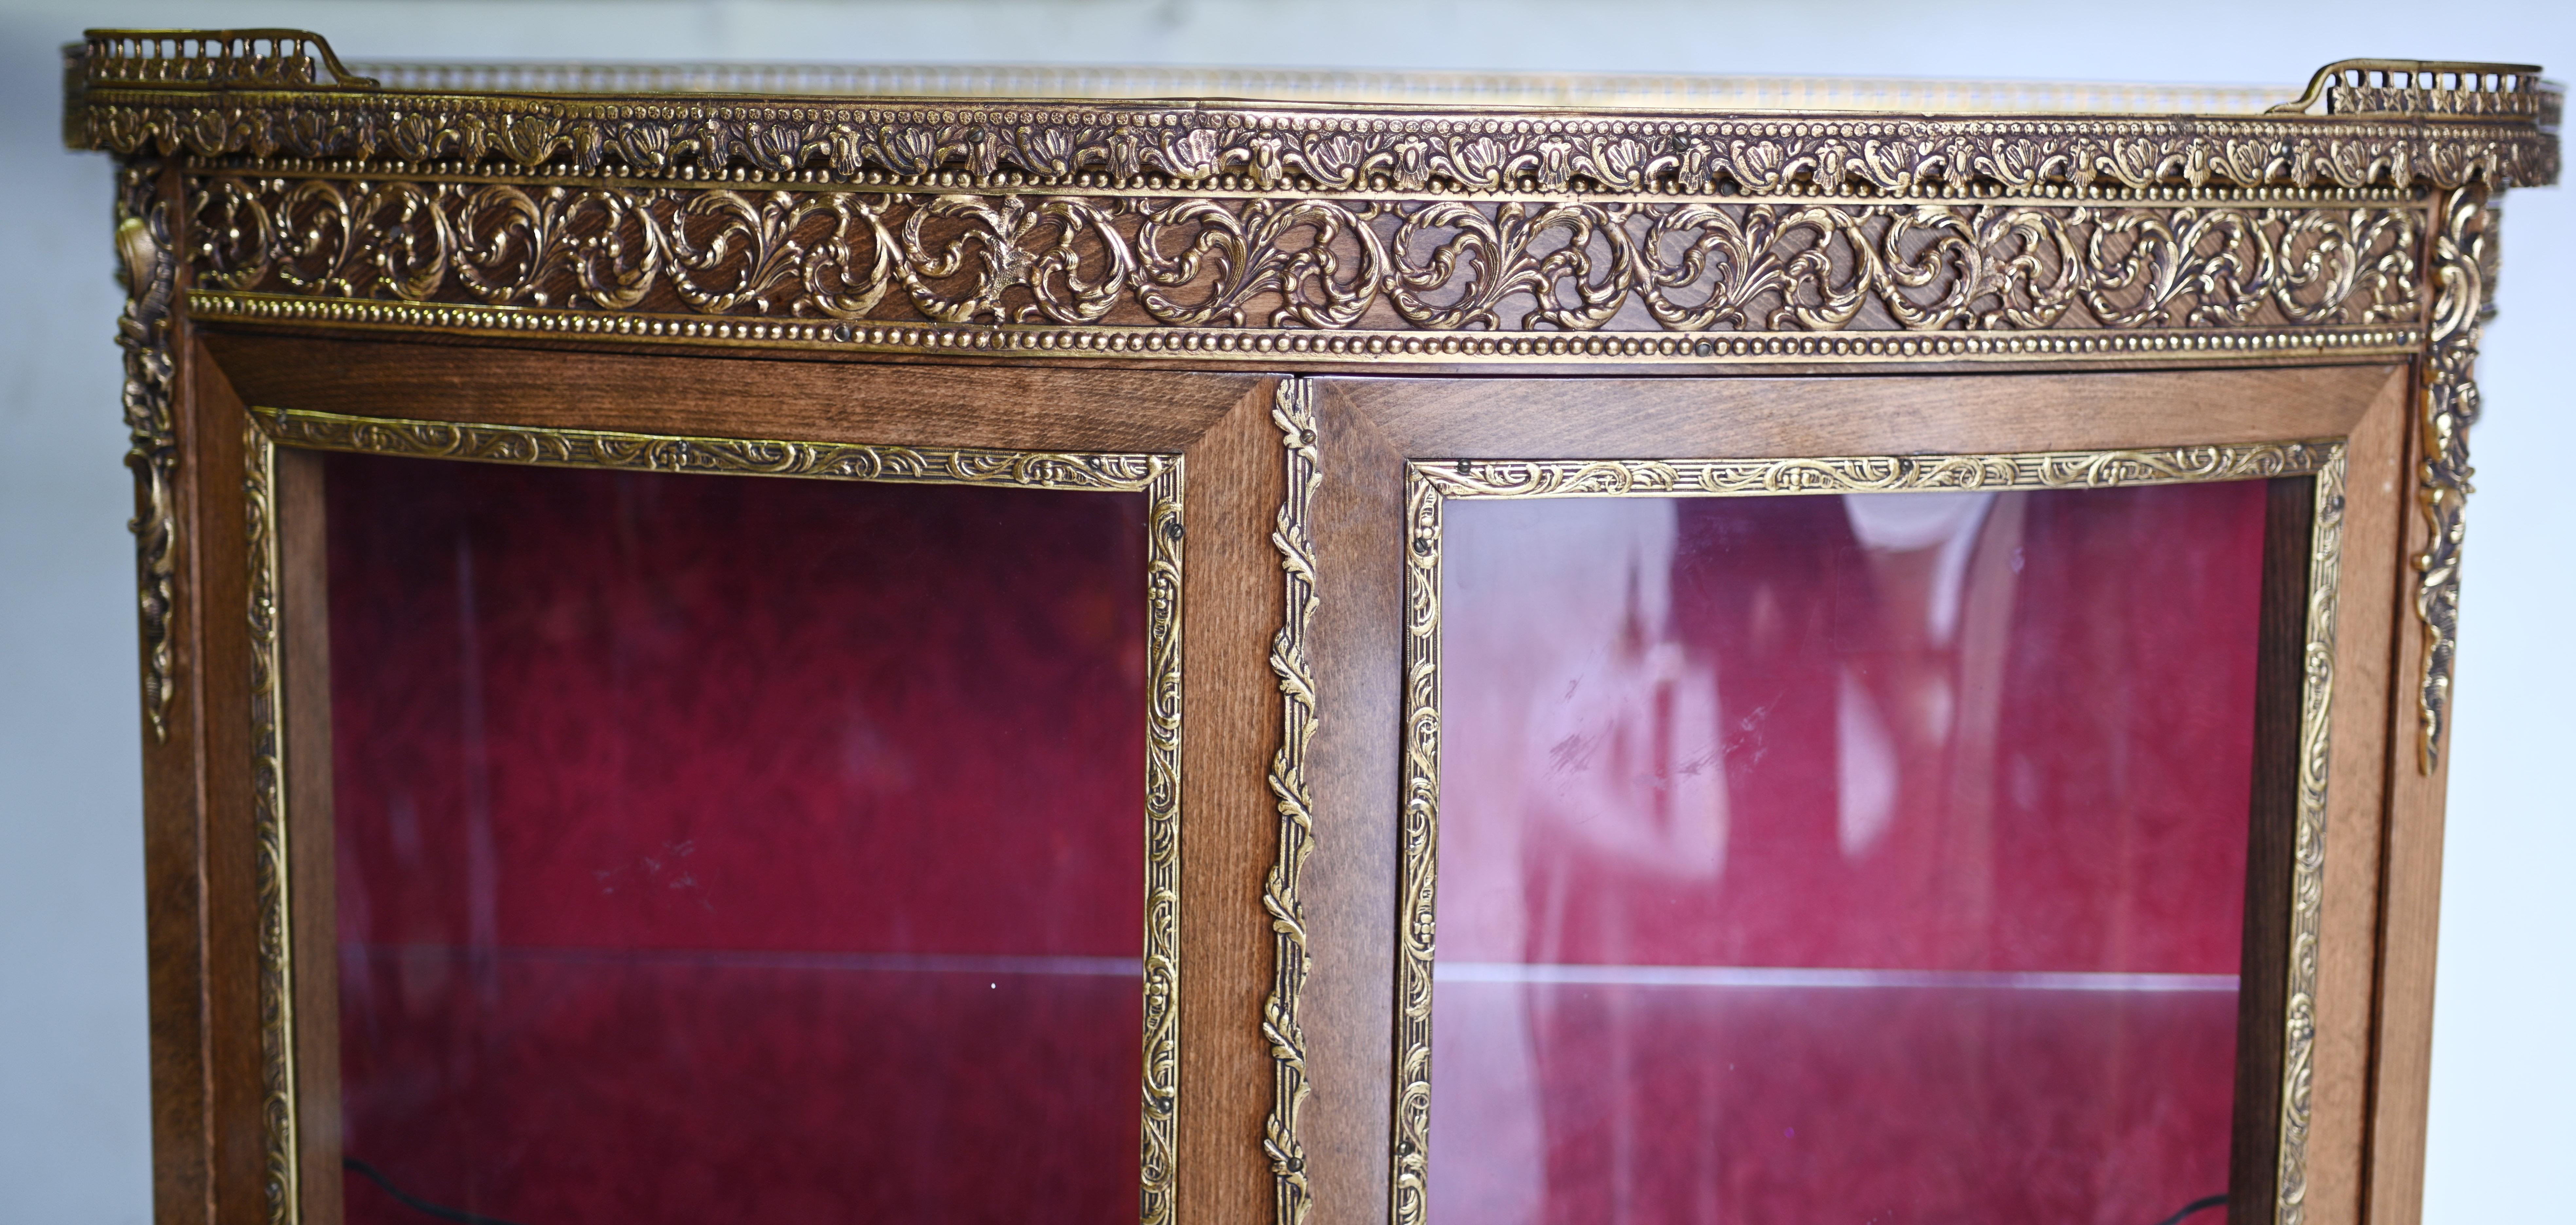 Elegant Verni Martin display cabinet with Angelica Kaufman panels showing hand painted Romanov scenes
We date this beautiful cabinet to circa 1900
Love the light colour of the satinwood complemented by original ormolu fixtures
Bought from a